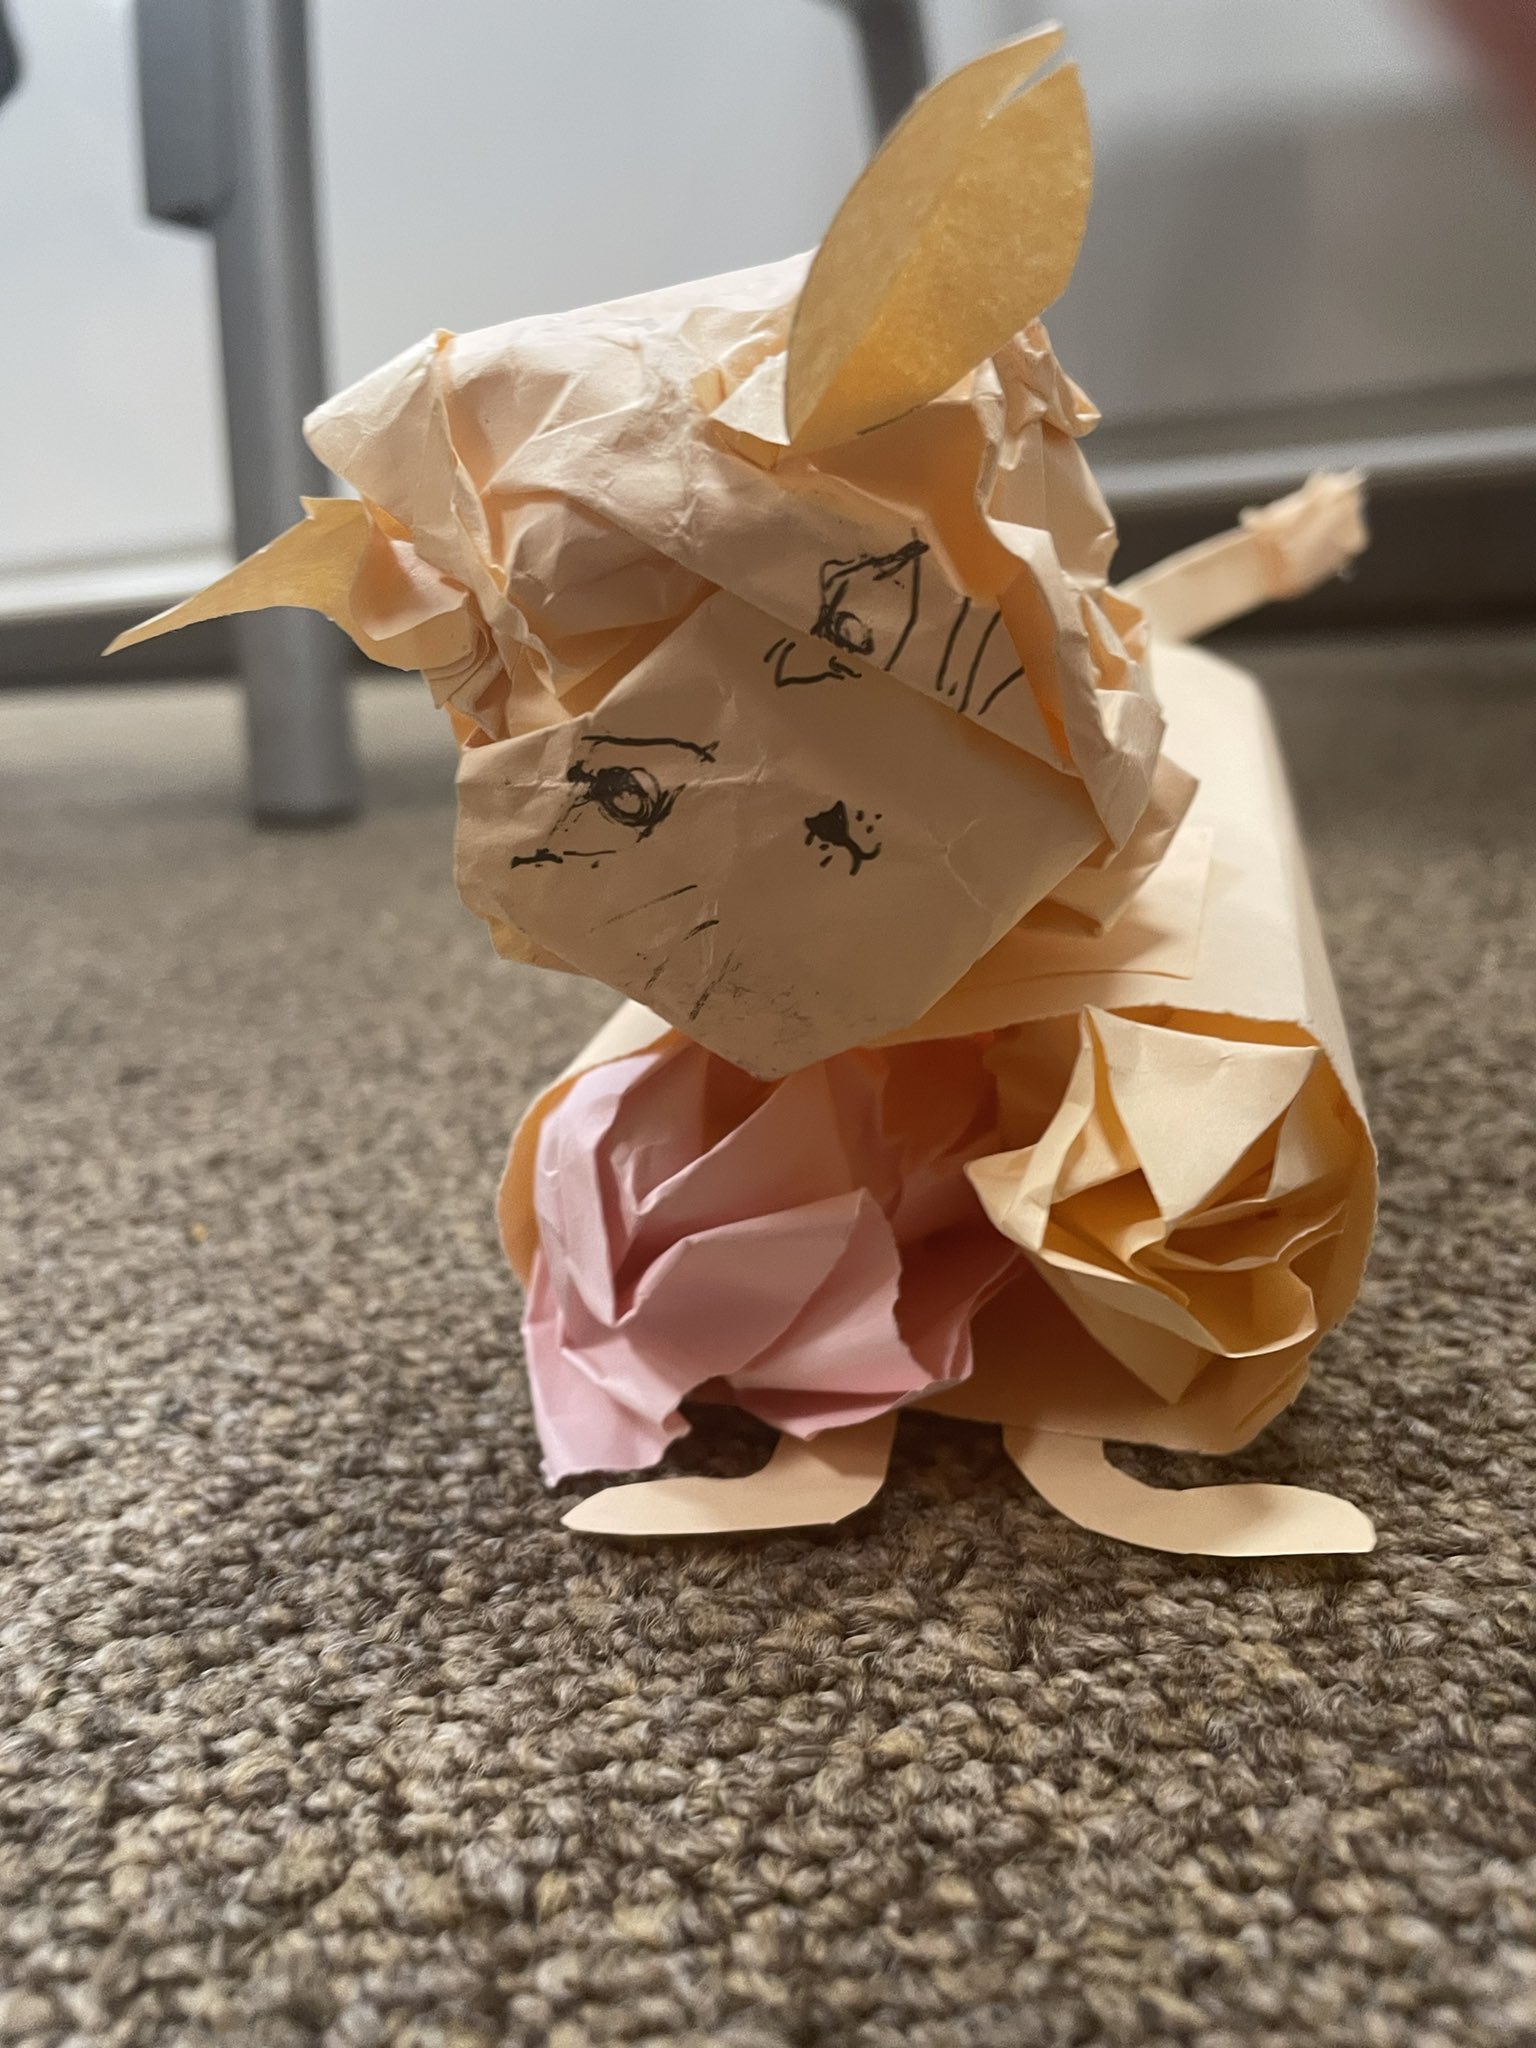 A small lion cub model made of paper.